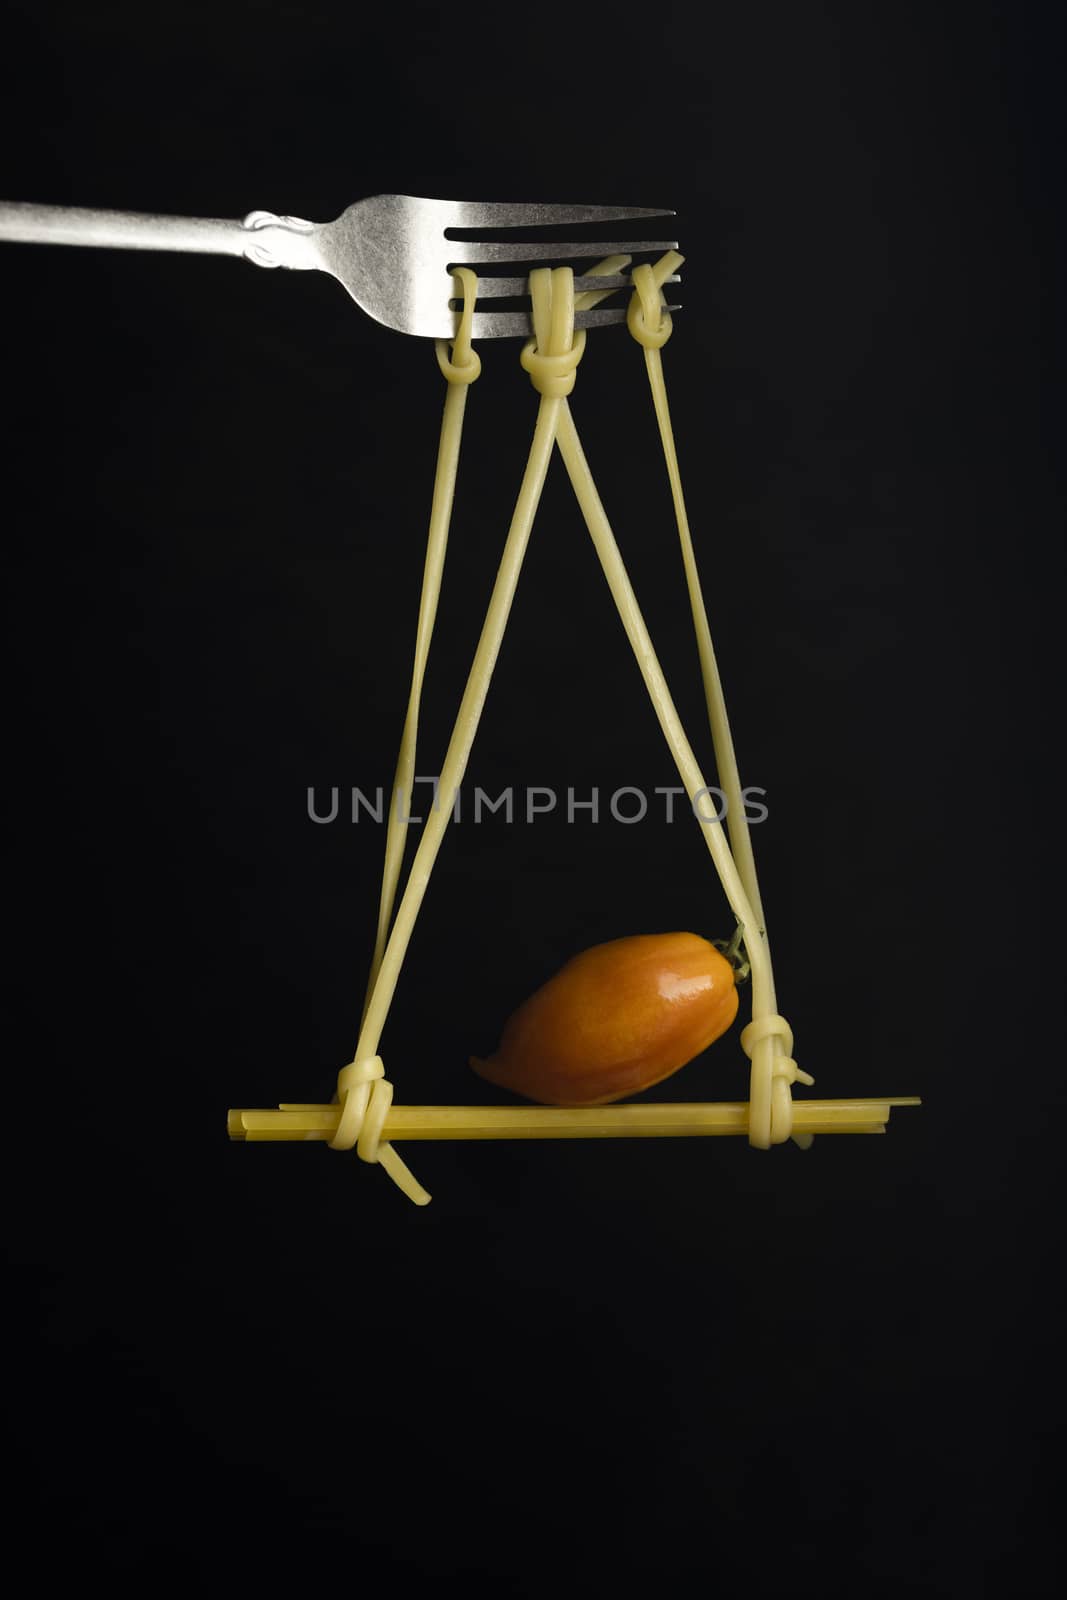 Spaghetti on a fork in front of black background. Swing from spaghetti.